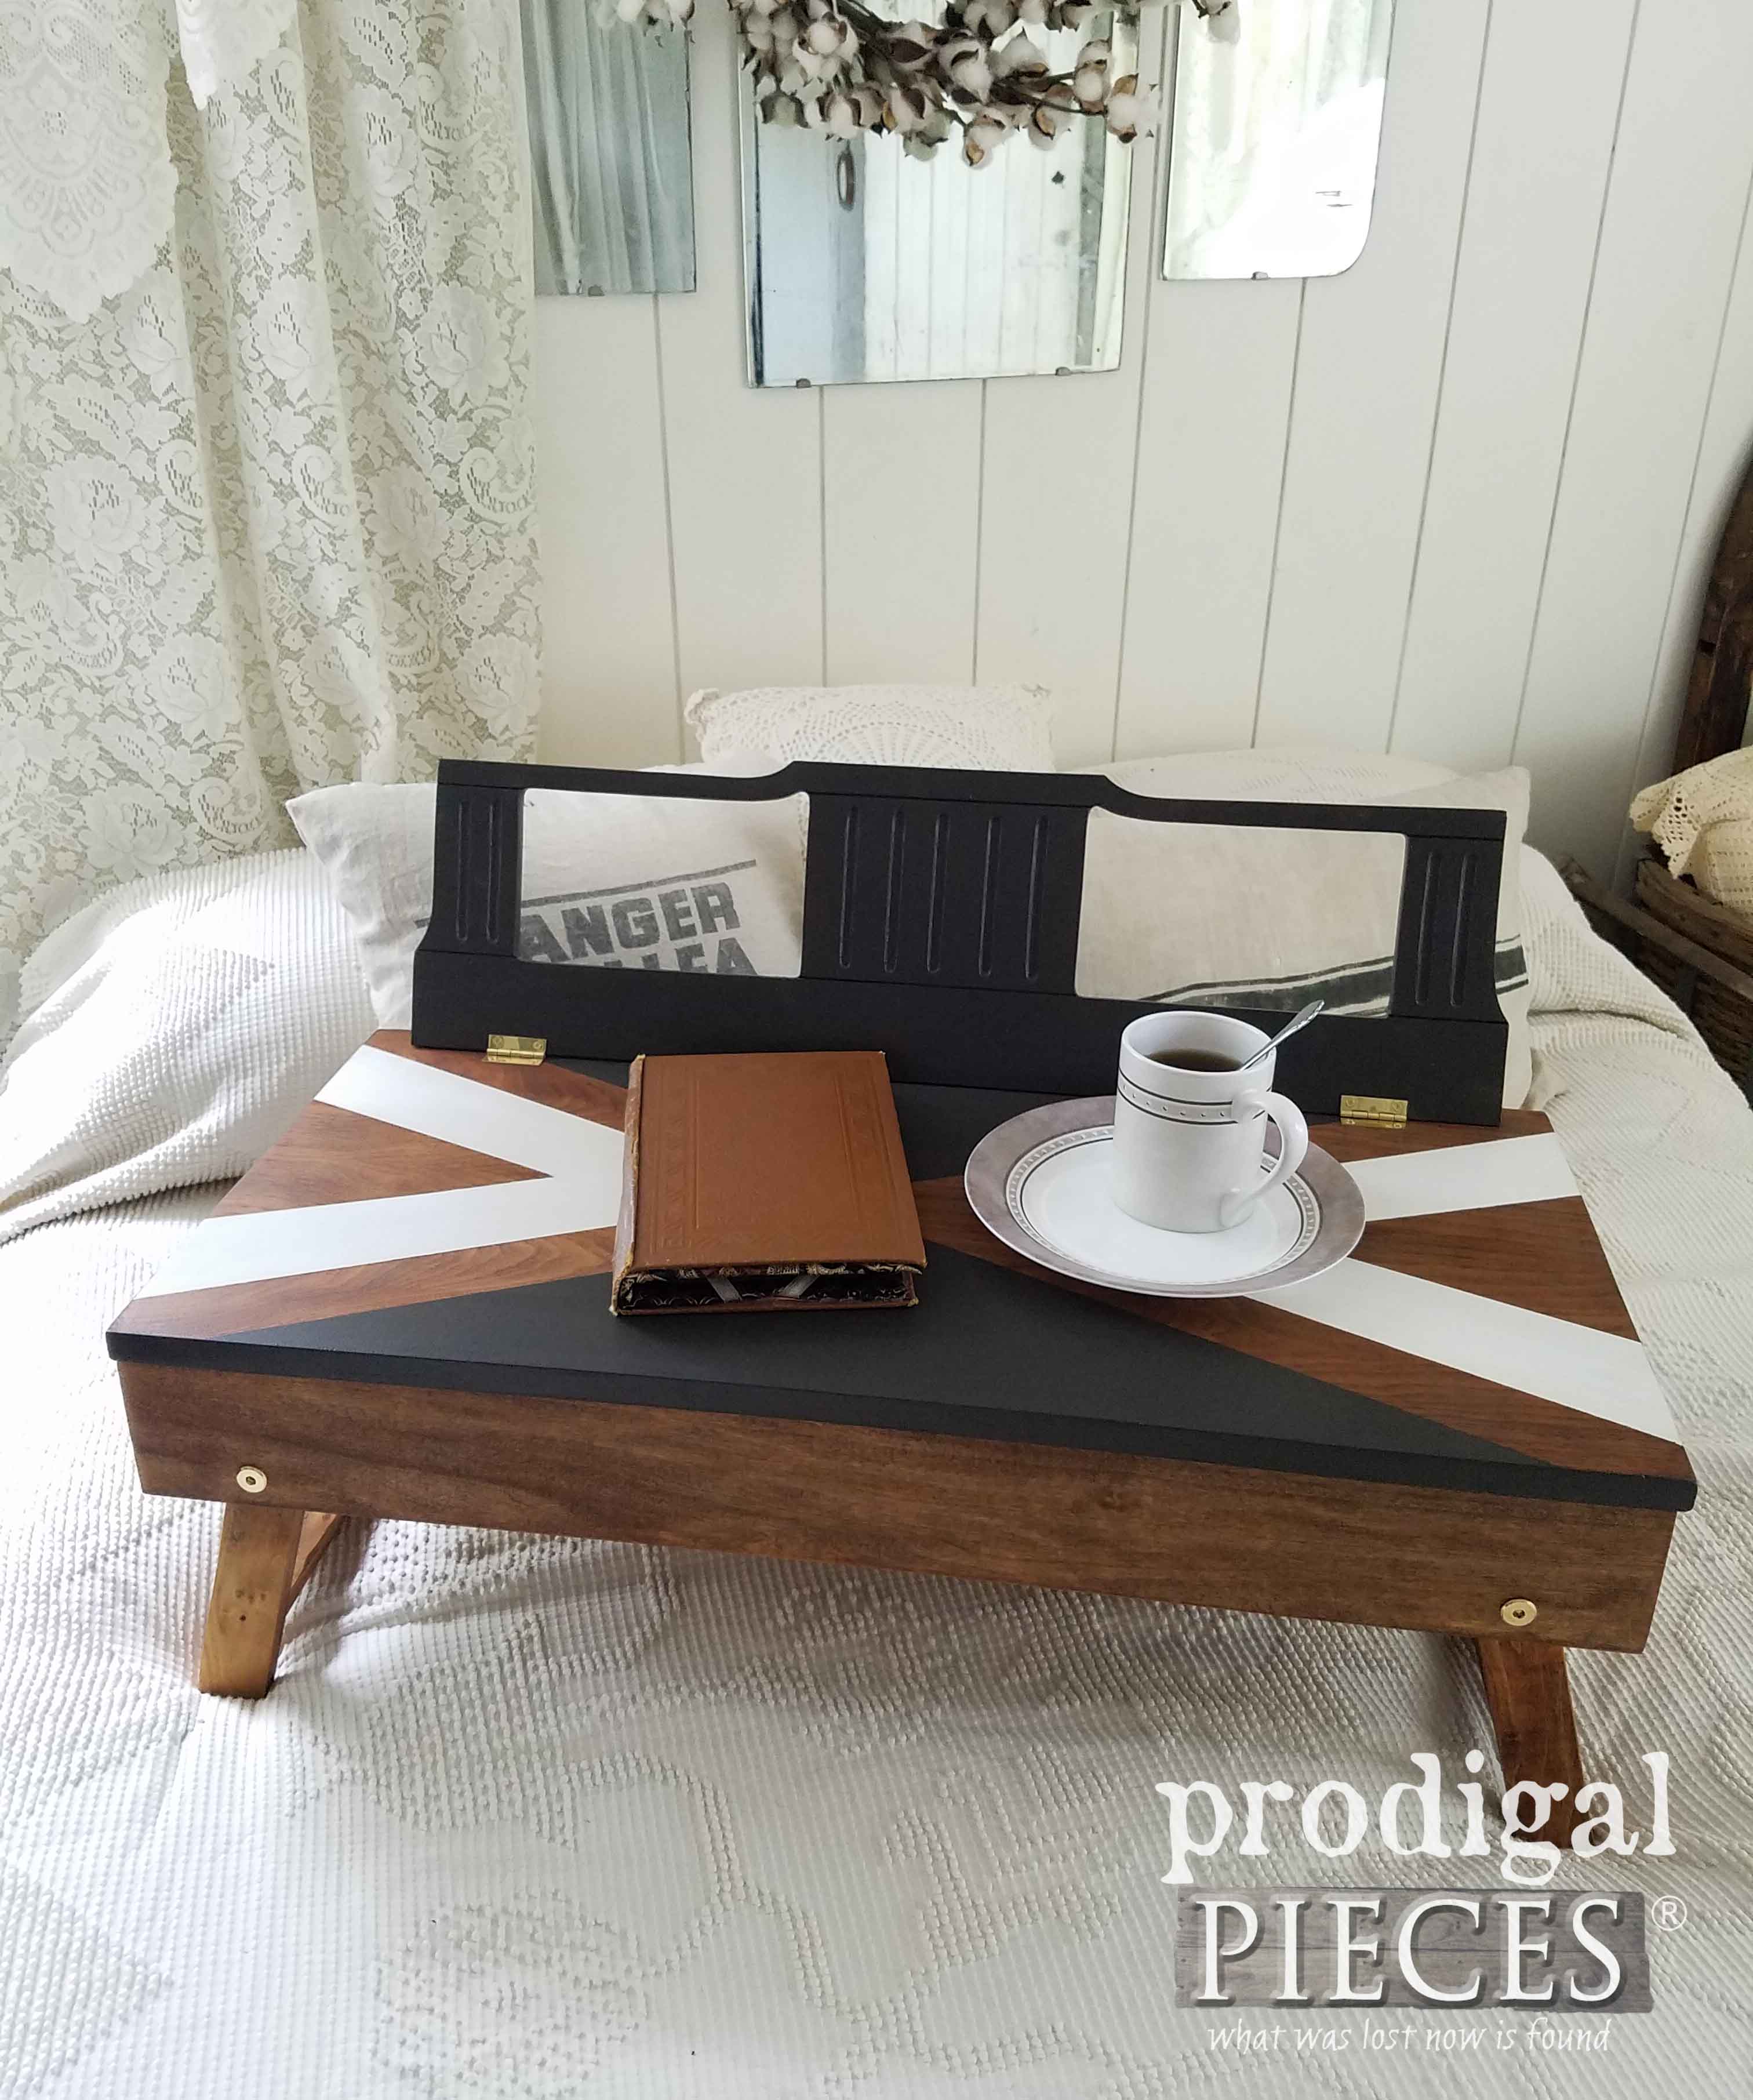 DIY Upcycled Lap Desk from Repurposed Piano Bench and Music Rest by Prodigal Pieces | prodigalpieces.com